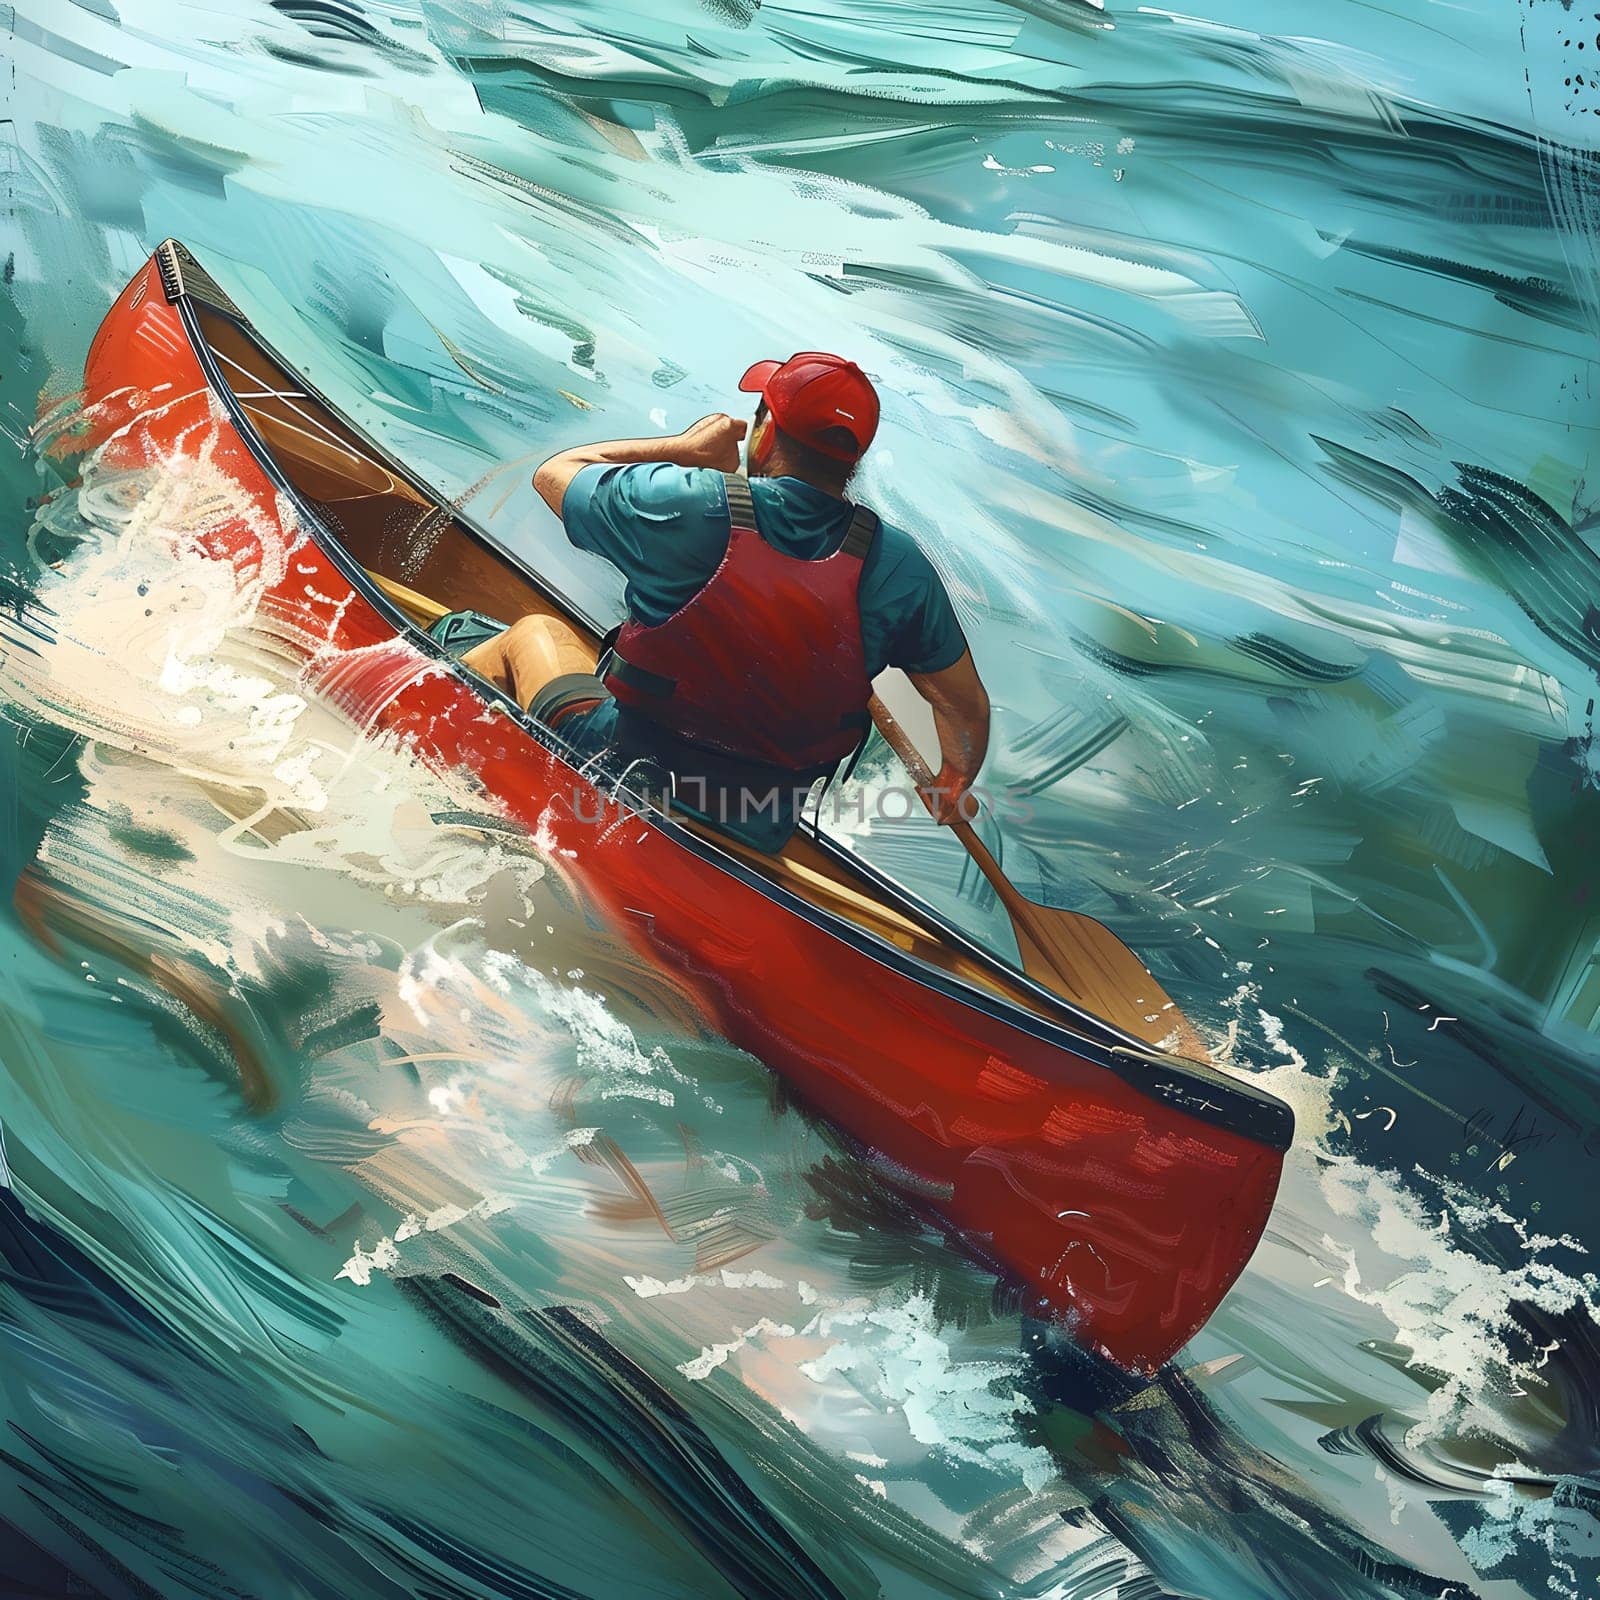 A man in a vibrant red kayak is navigating through the calm waters using a paddle, enjoying the outdoor recreation and soaking up the beauty of the surroundings